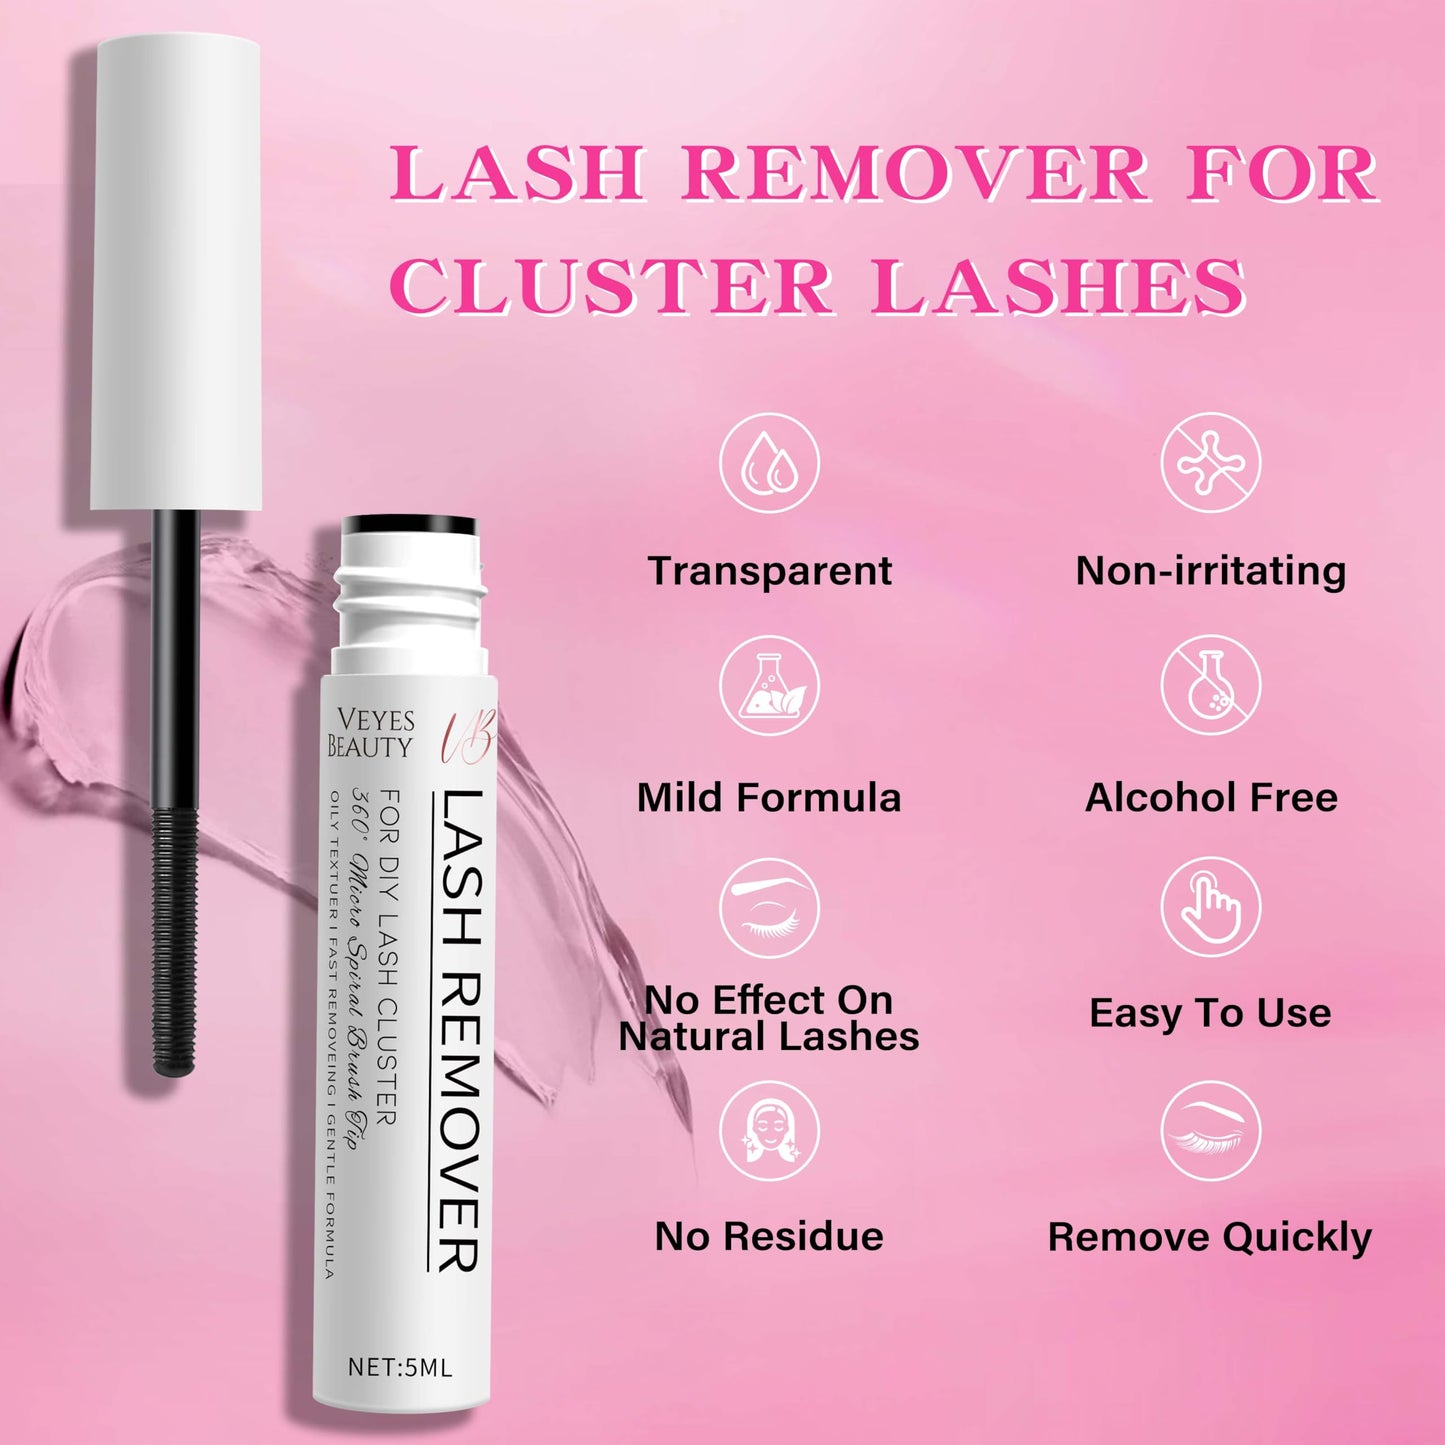 VEYESBEAUTY Cluster Lash Remover & Cleaner Kit DIY Lash Aftecare Kit for Eyelash extensions and Natural Lashes, Remover, Shampoo, Cleansing Brush, Mascara Wand Self-Application Eyelash Cleansing Kit